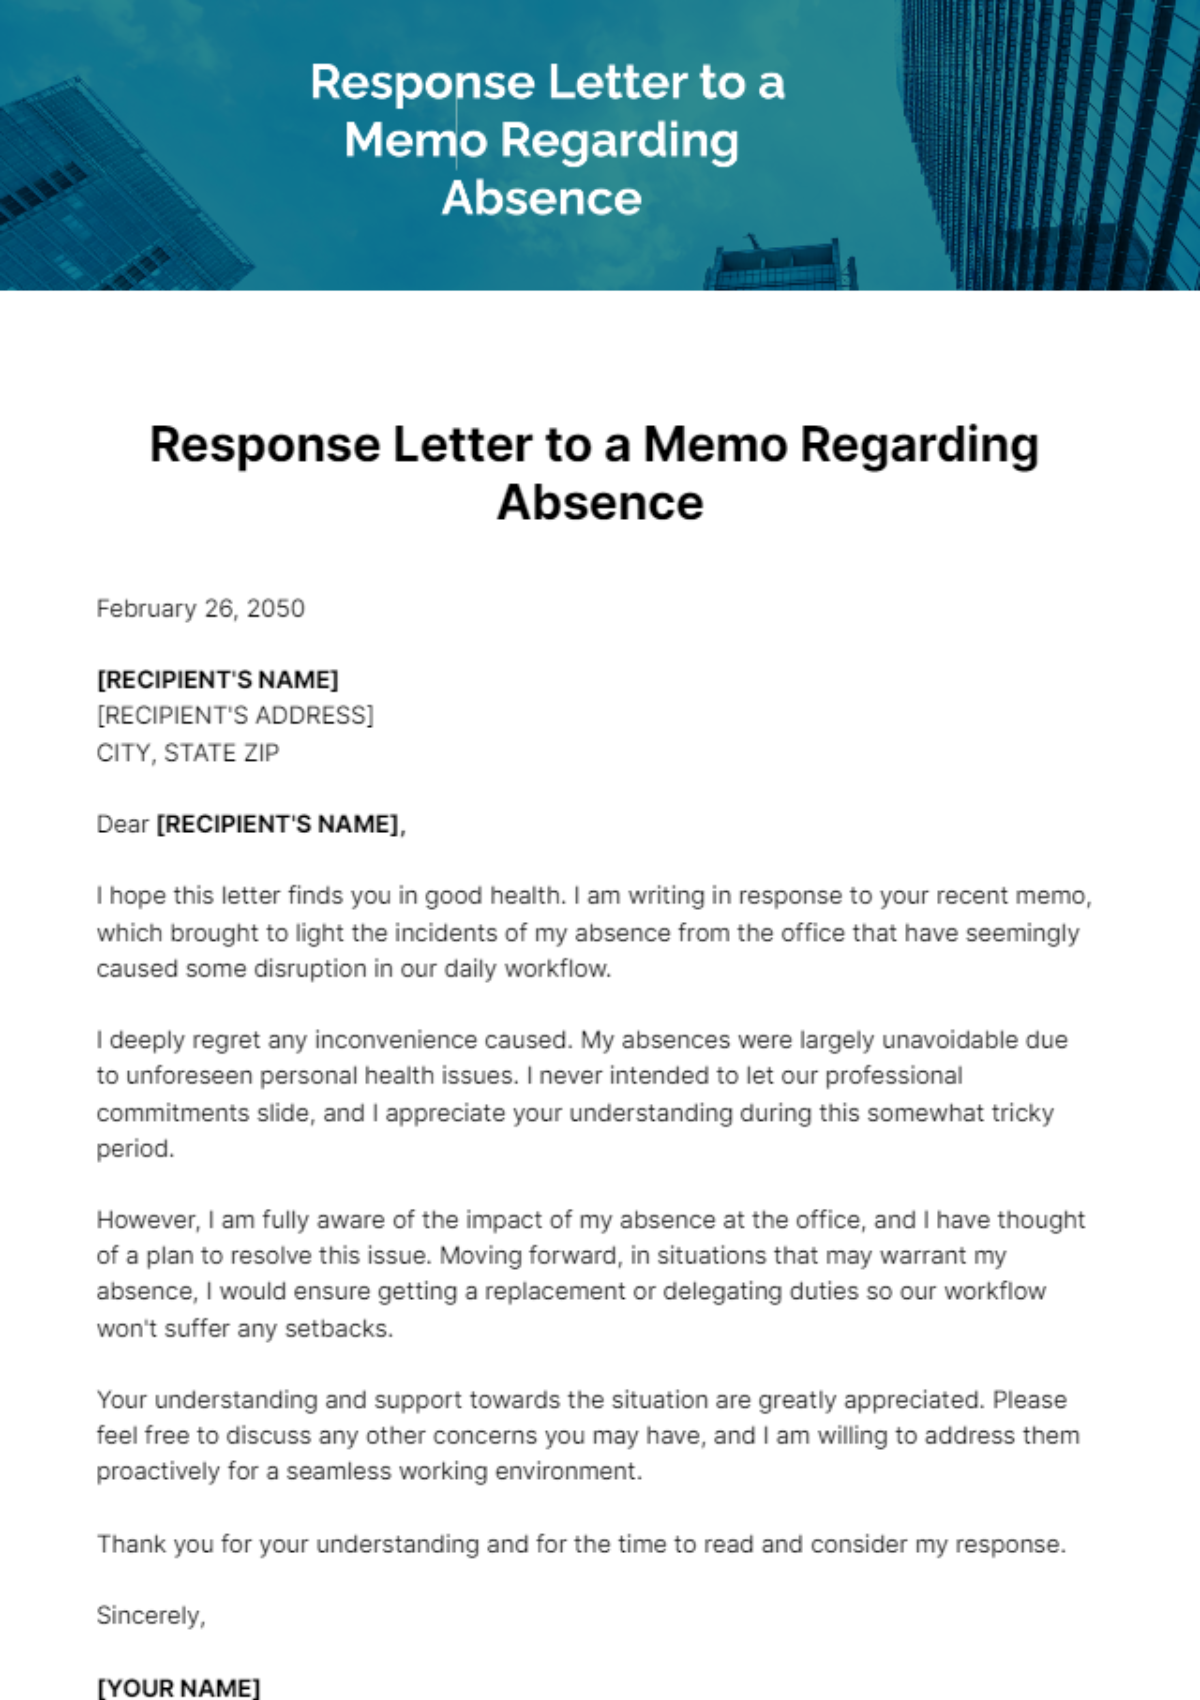 Free Response Letter to a Memo Regarding Absence Template